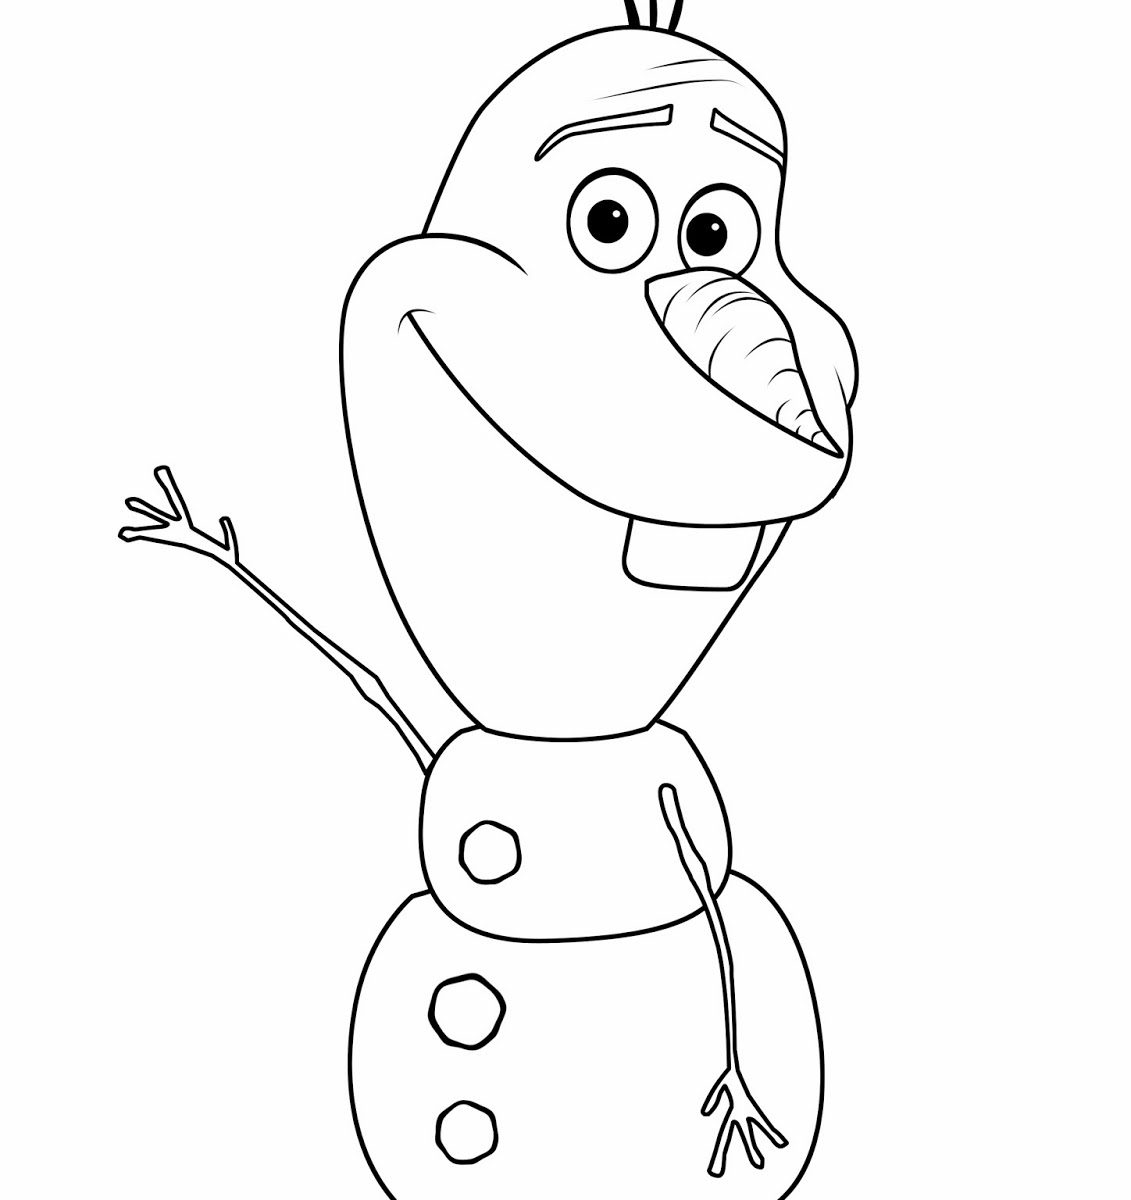 Olaf Printable Coloring Pages at GetColorings.com | Free printable ...